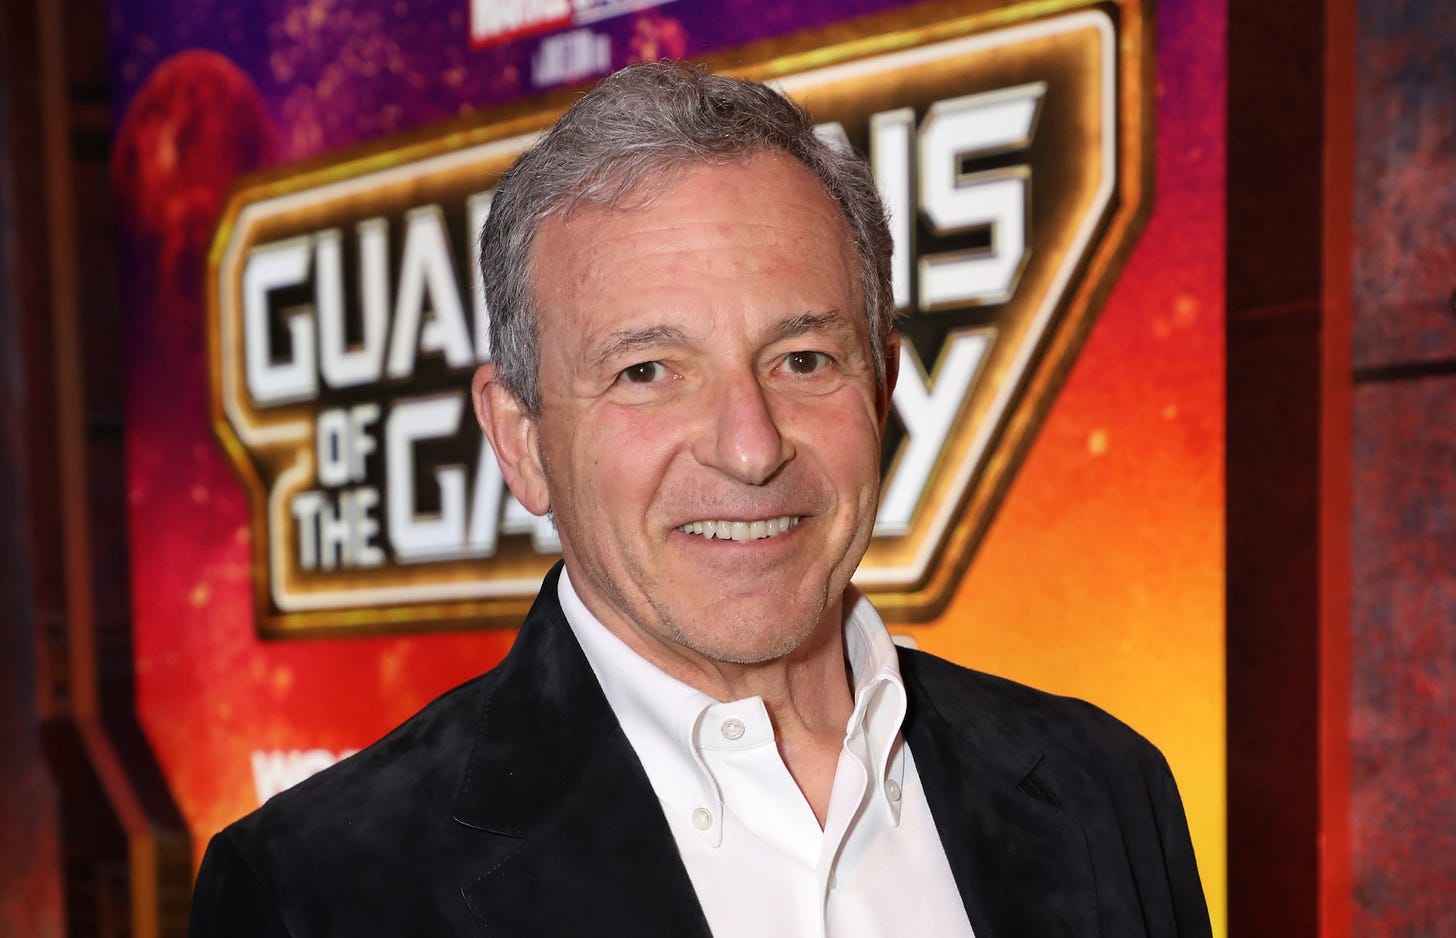 Bob Iger attends the Guardians of the Galaxy Vol. 3 Premiere at the Dolby Theatre in Hollywood CA on Thursday, April 27, 2023